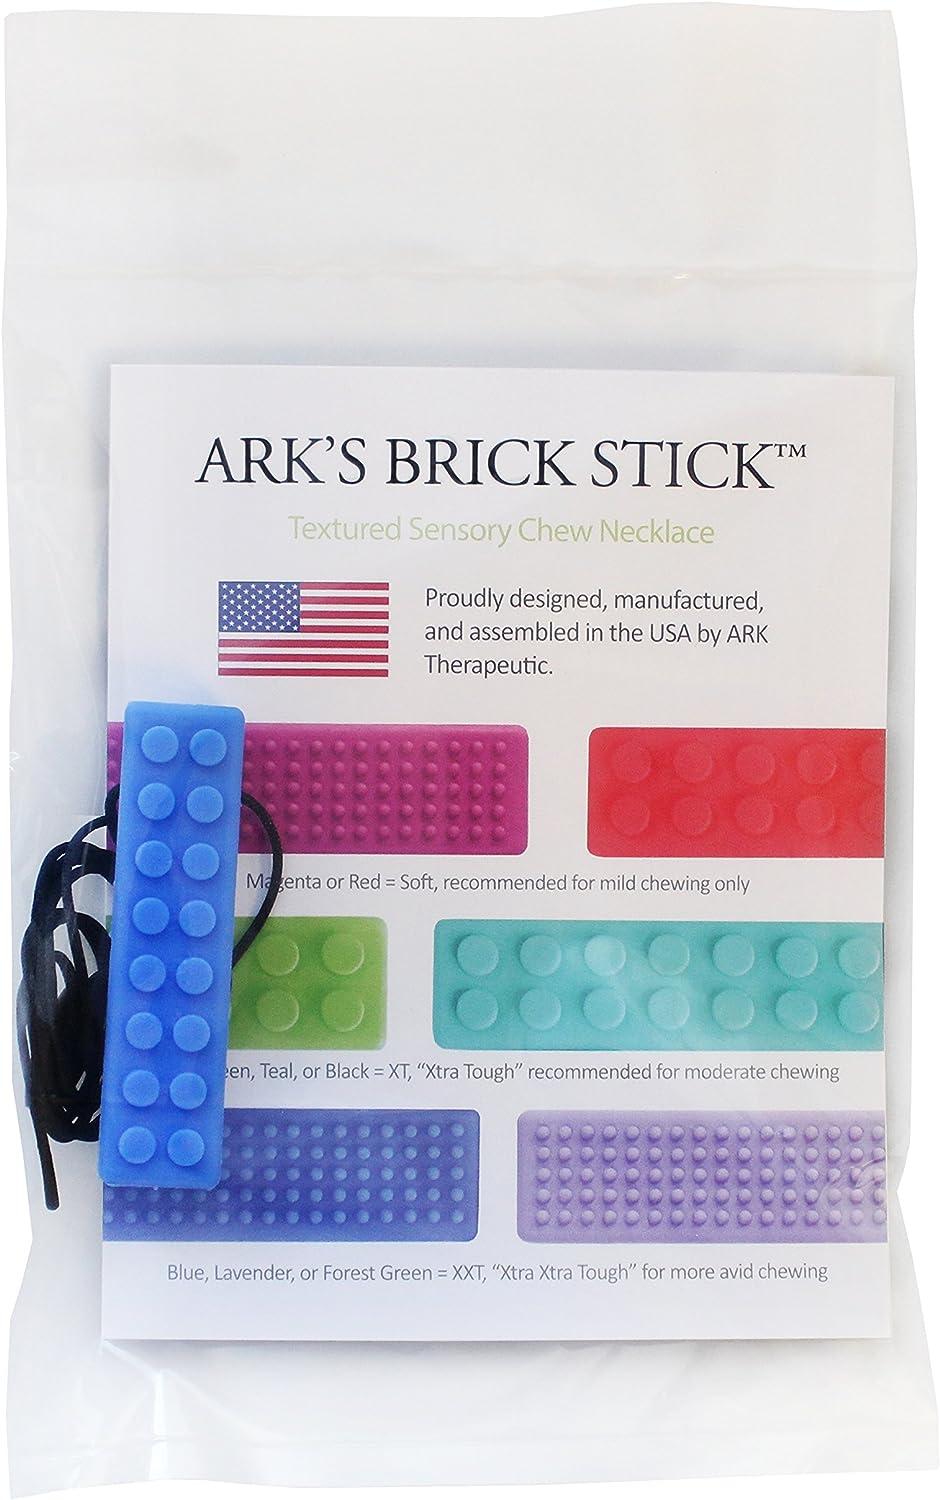 ARKS BRICK STICK CHEW NECKLACE (SMOOTH)